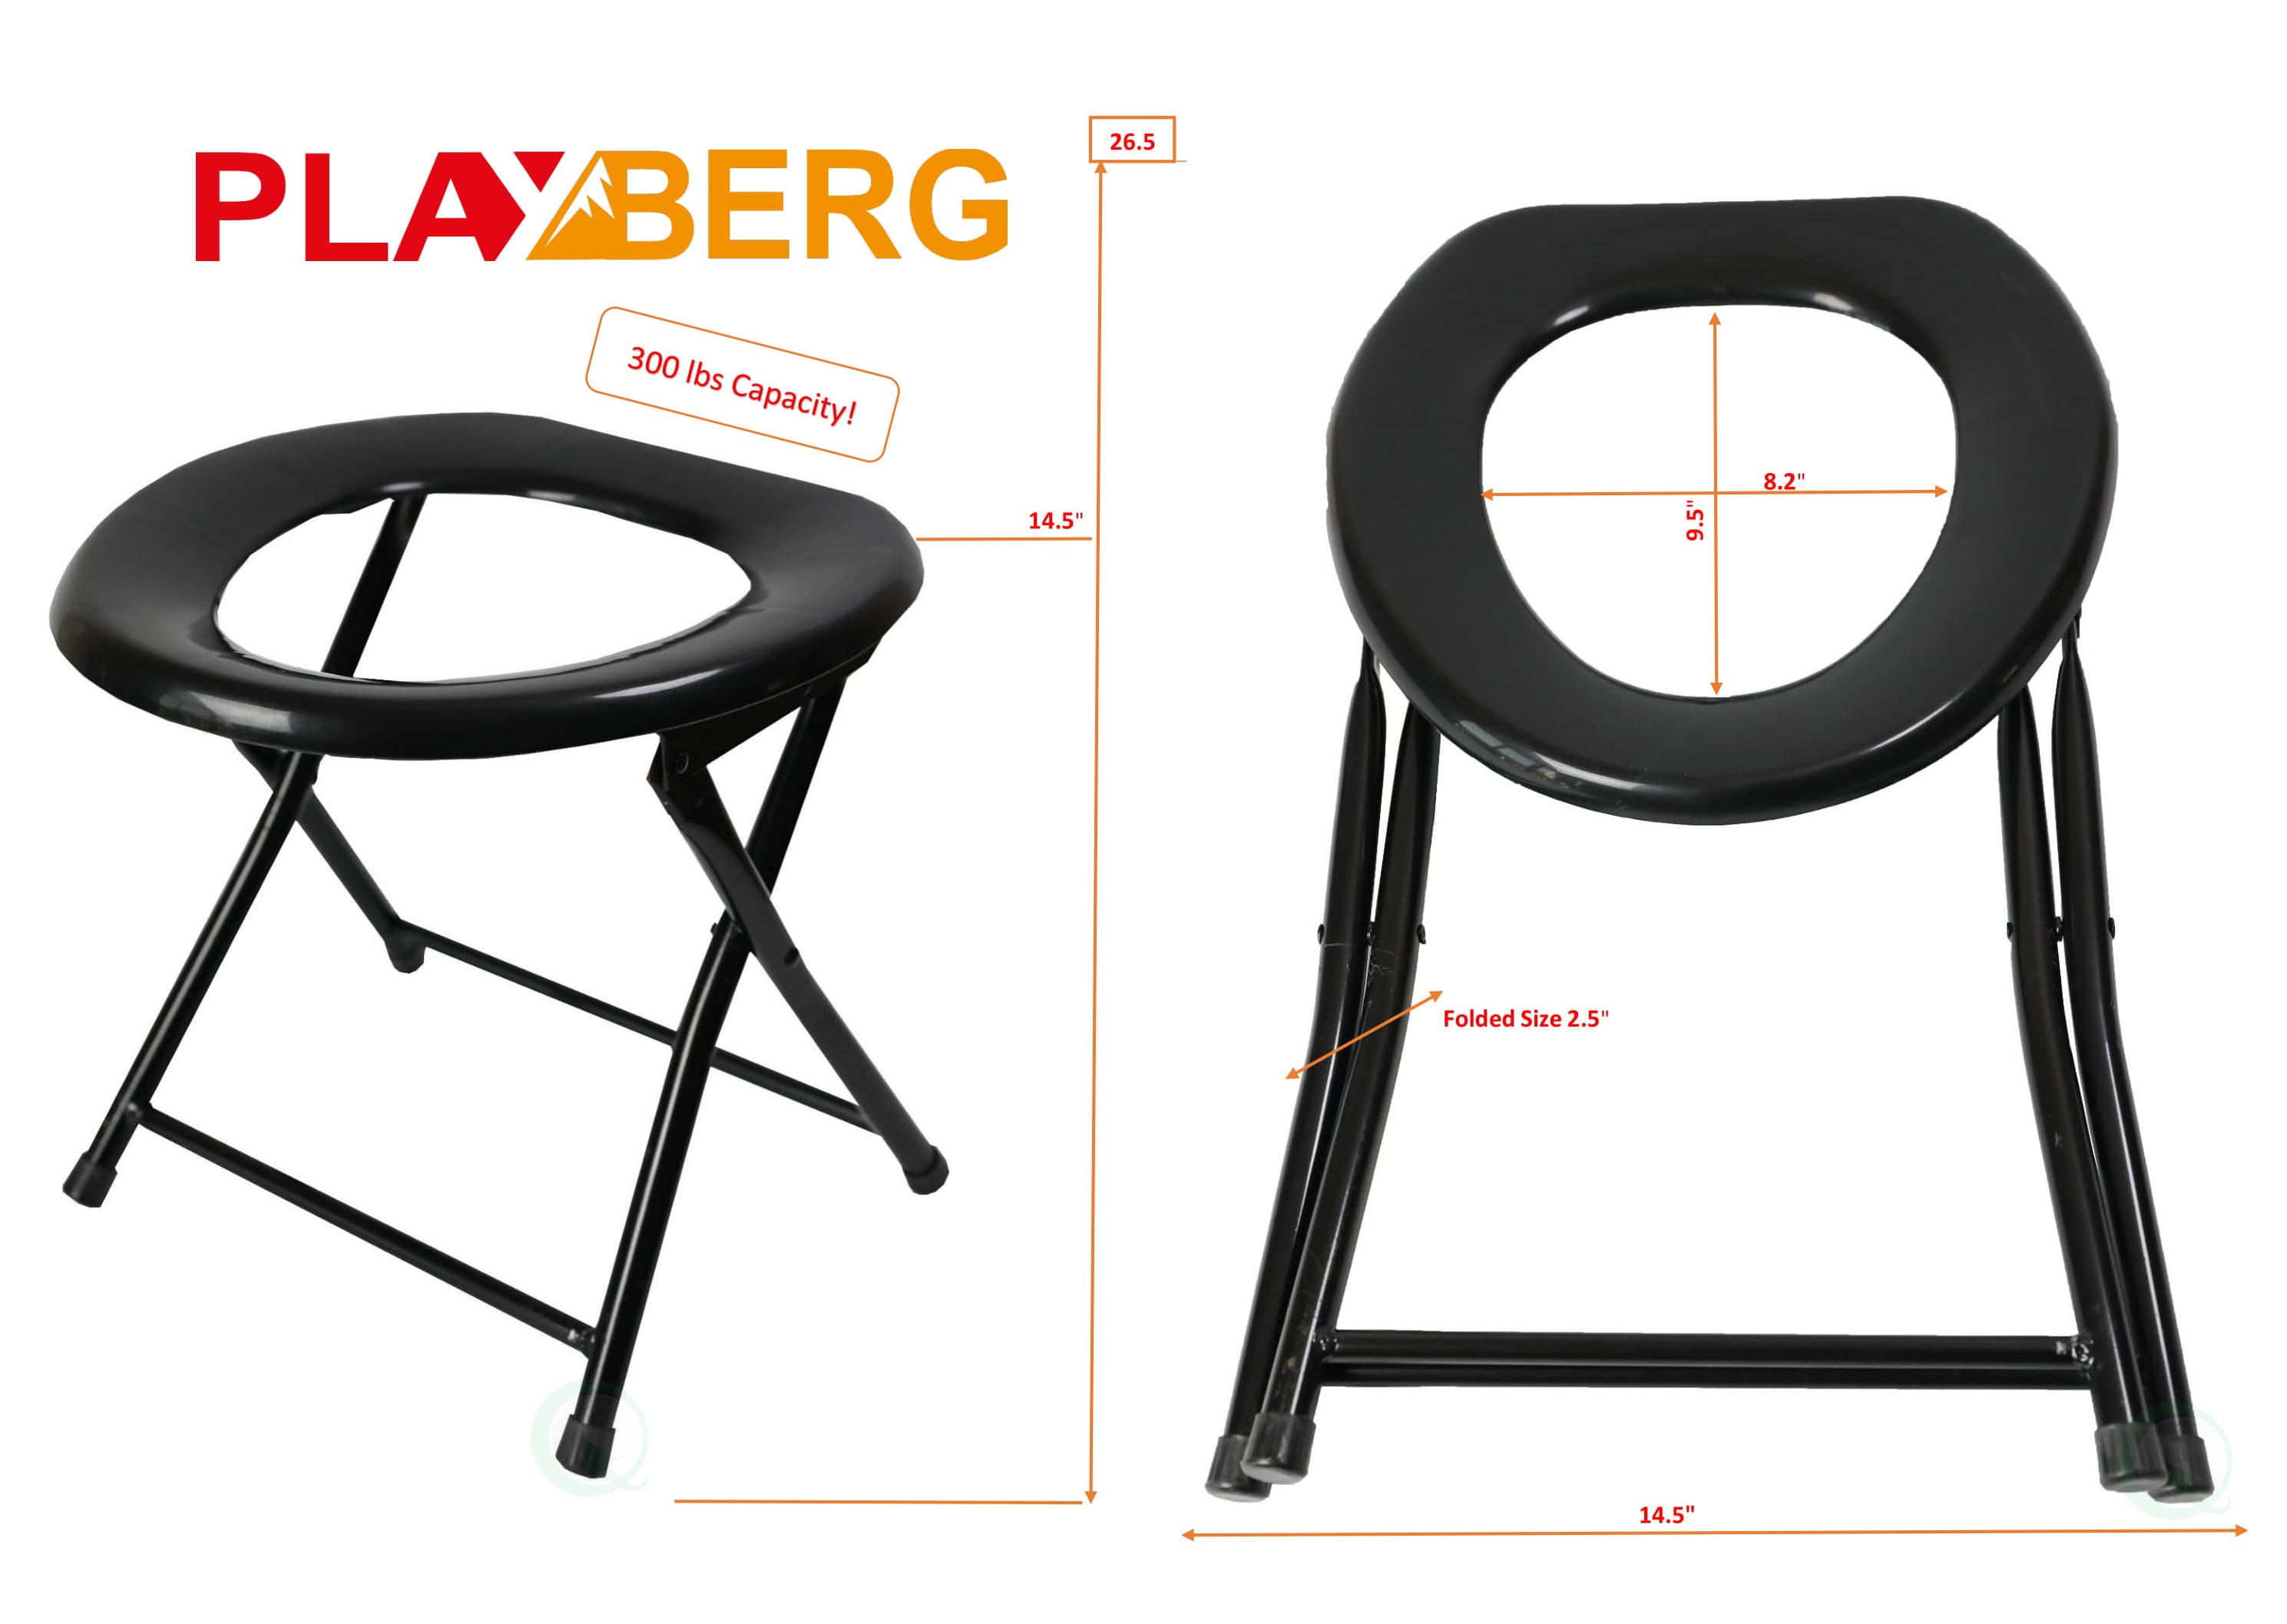 PLAYBERG Portable Folding Outdoor Camping Chair with Can Holder